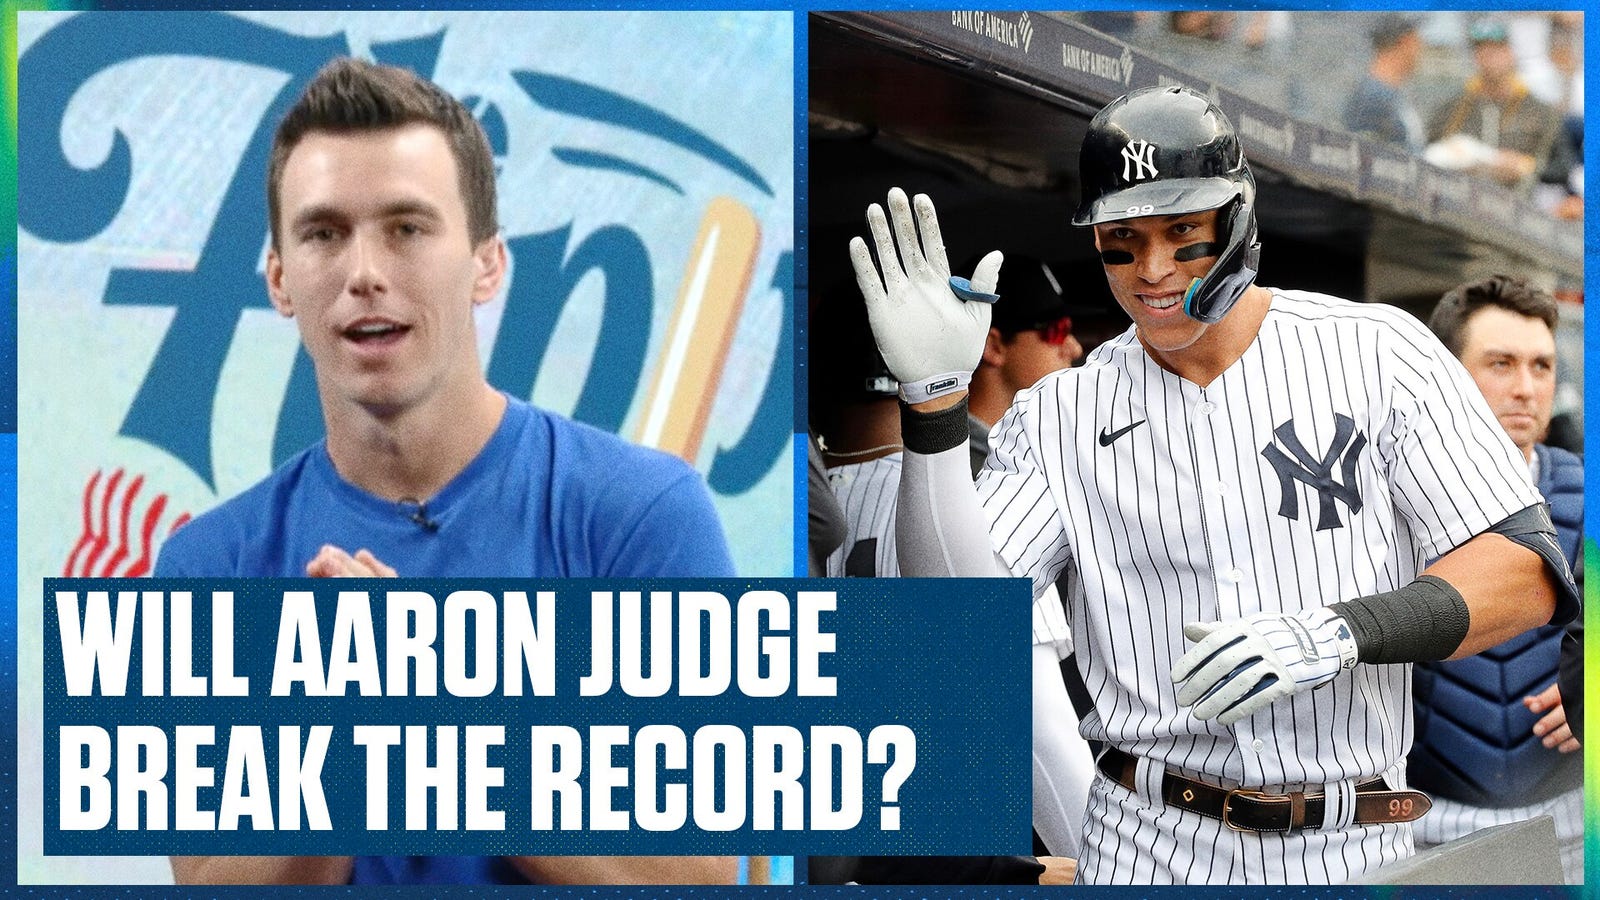 Aaron Judge's pursuit of the American League home run record